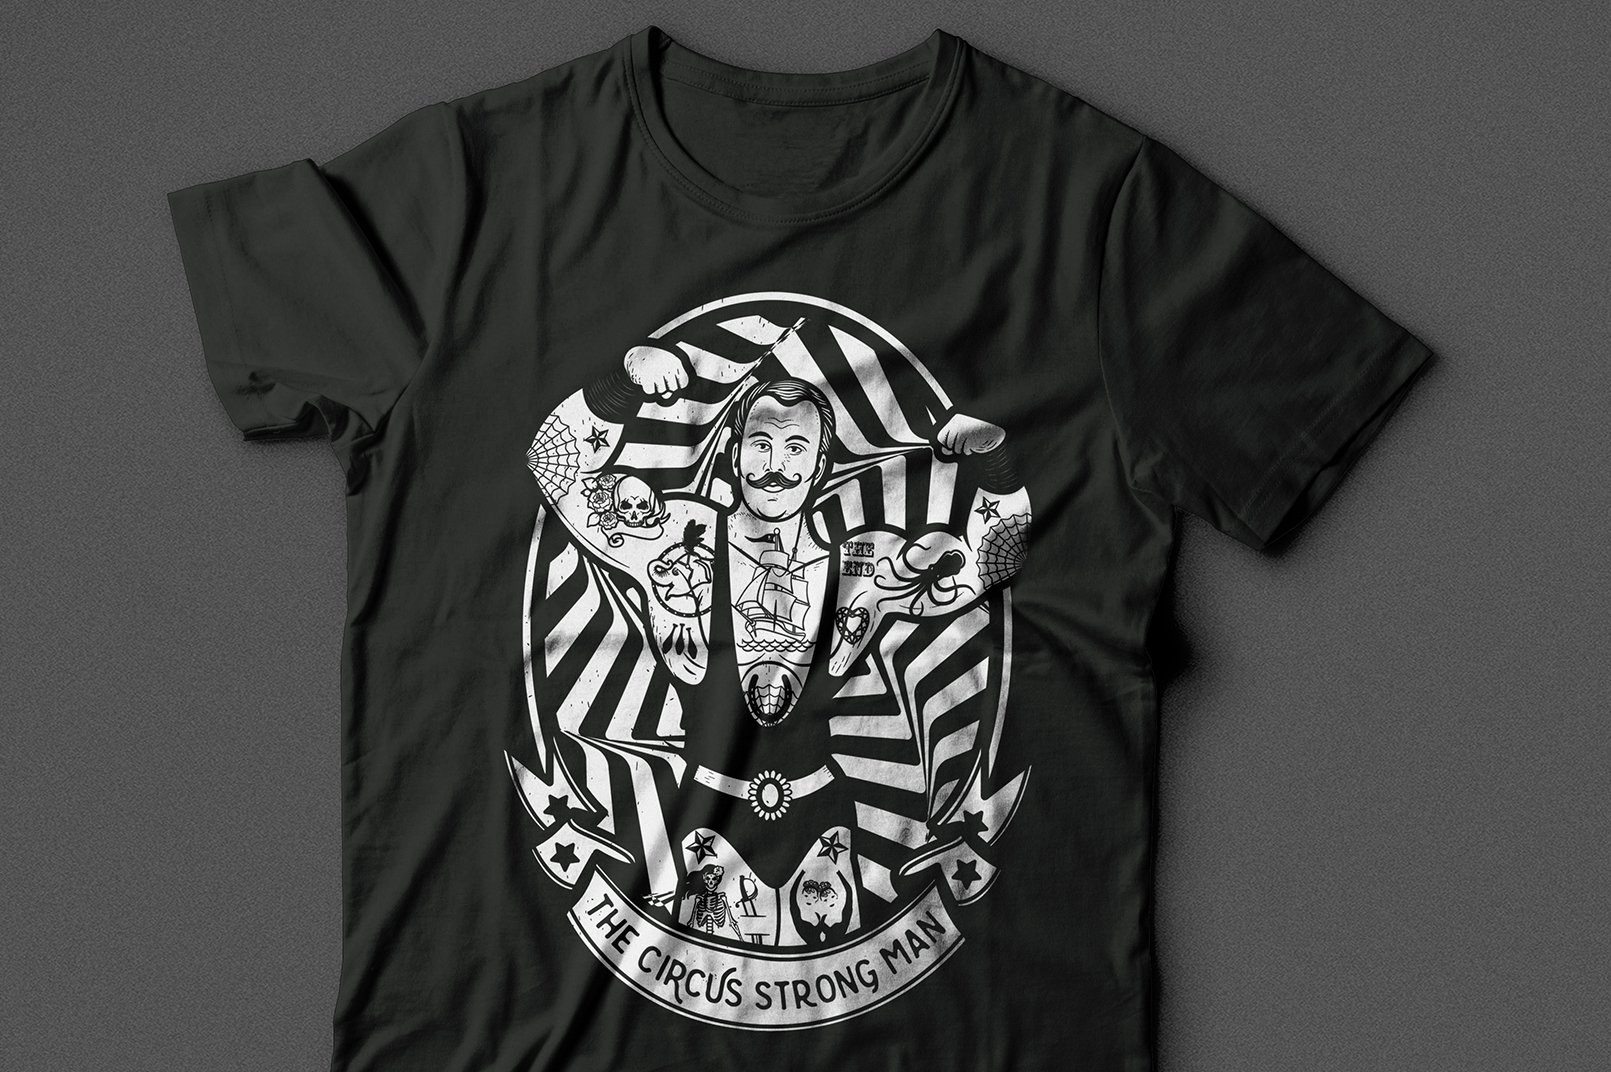 Black t-shirt with a BW circus graphic.